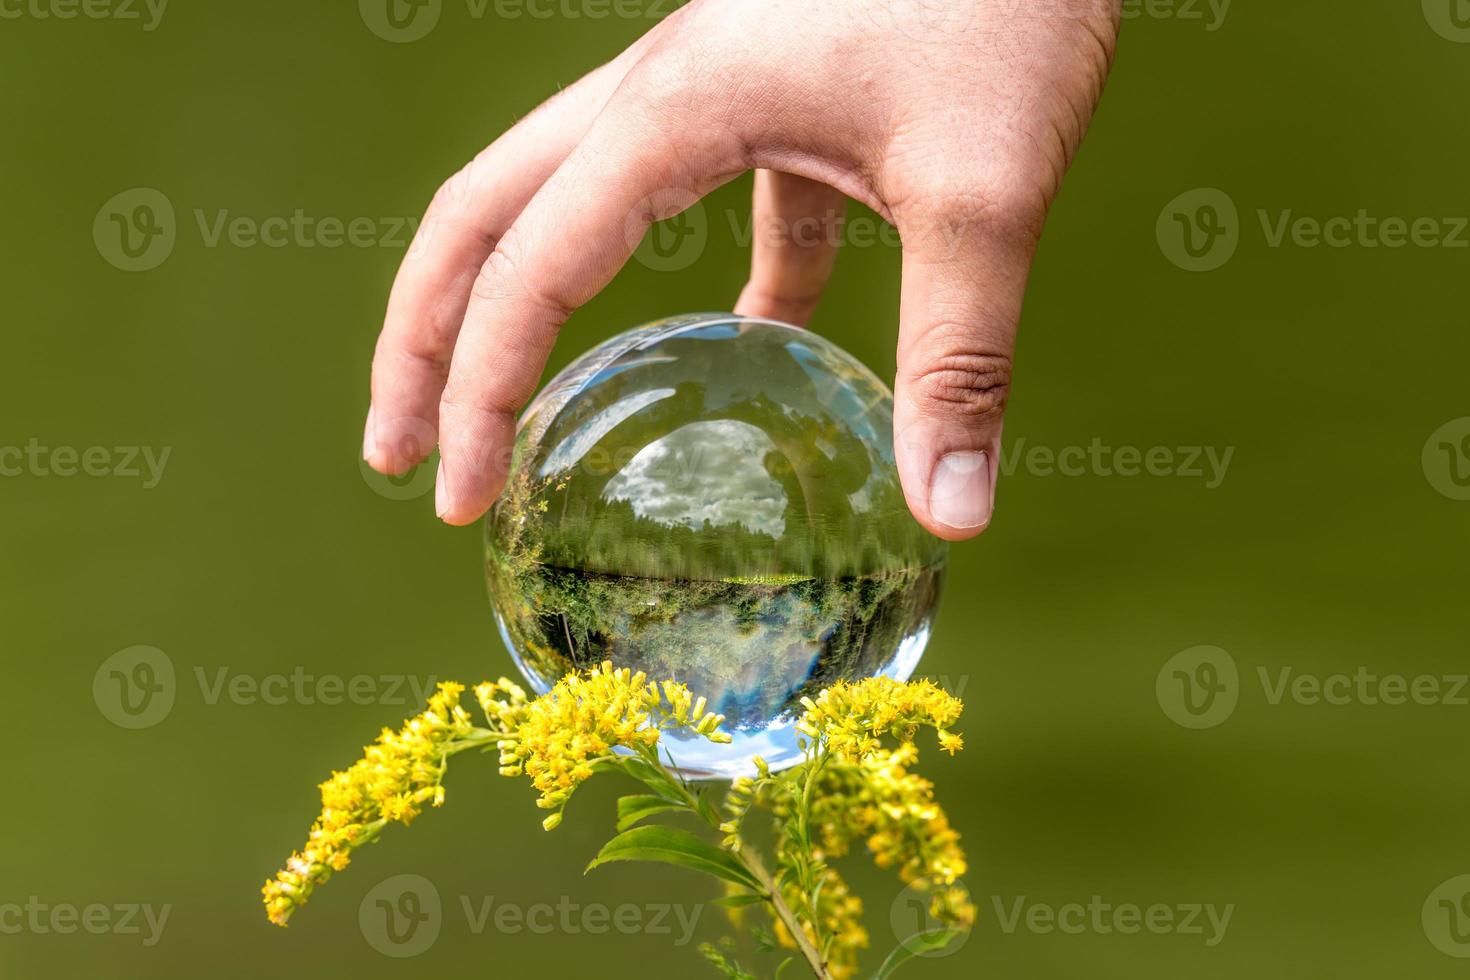 A mans hand reaches for a glass globe with a mirrored lake trees and sky against a green background photo